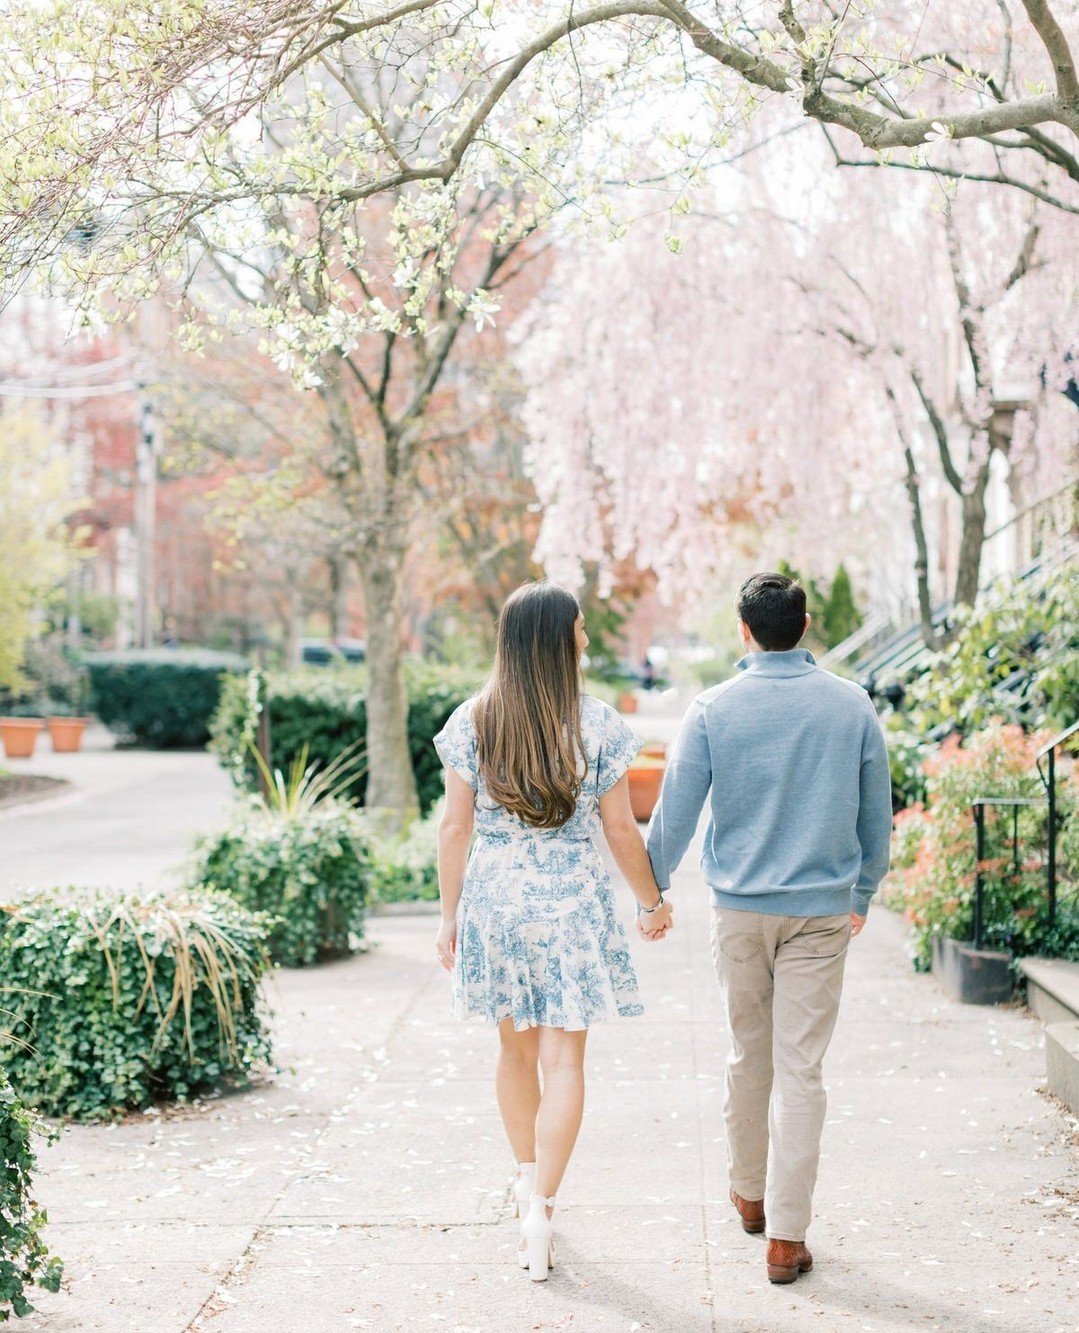 sunny spring mornings in new haven are my favorite 🌸⁠
⁠
⁠
⁠
⁠
⁠
⁠
⁠
⁠
New Haven engagement session | New Haven photographer | connecticut film photographer | Connecticut wedding photographer | Joanna Fisher photography | New England wedding photogra